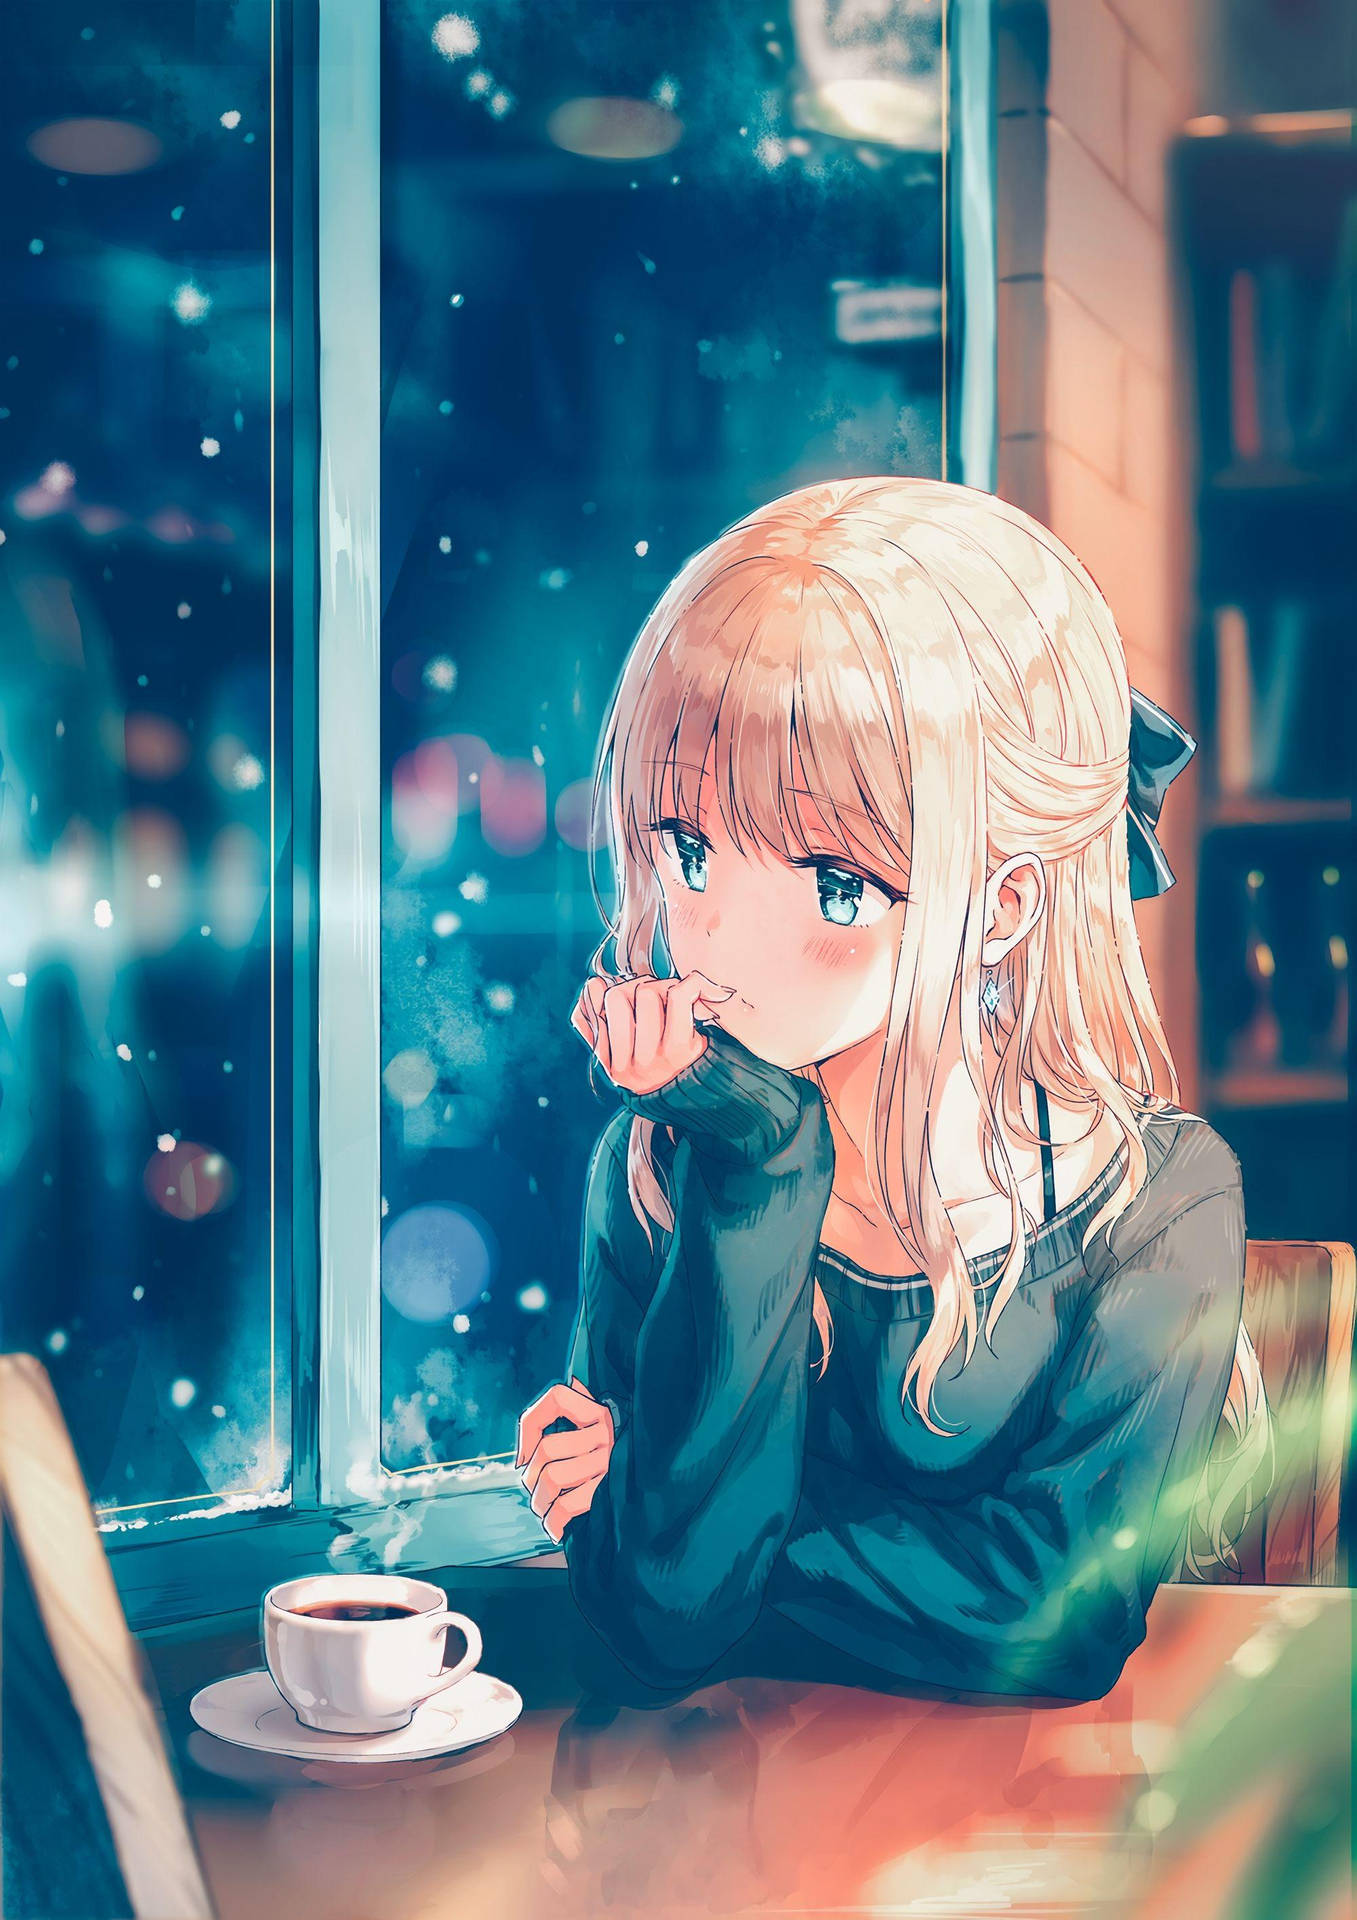 Easy Sad Anime Drawings Wallpapers - Wallpaper Cave